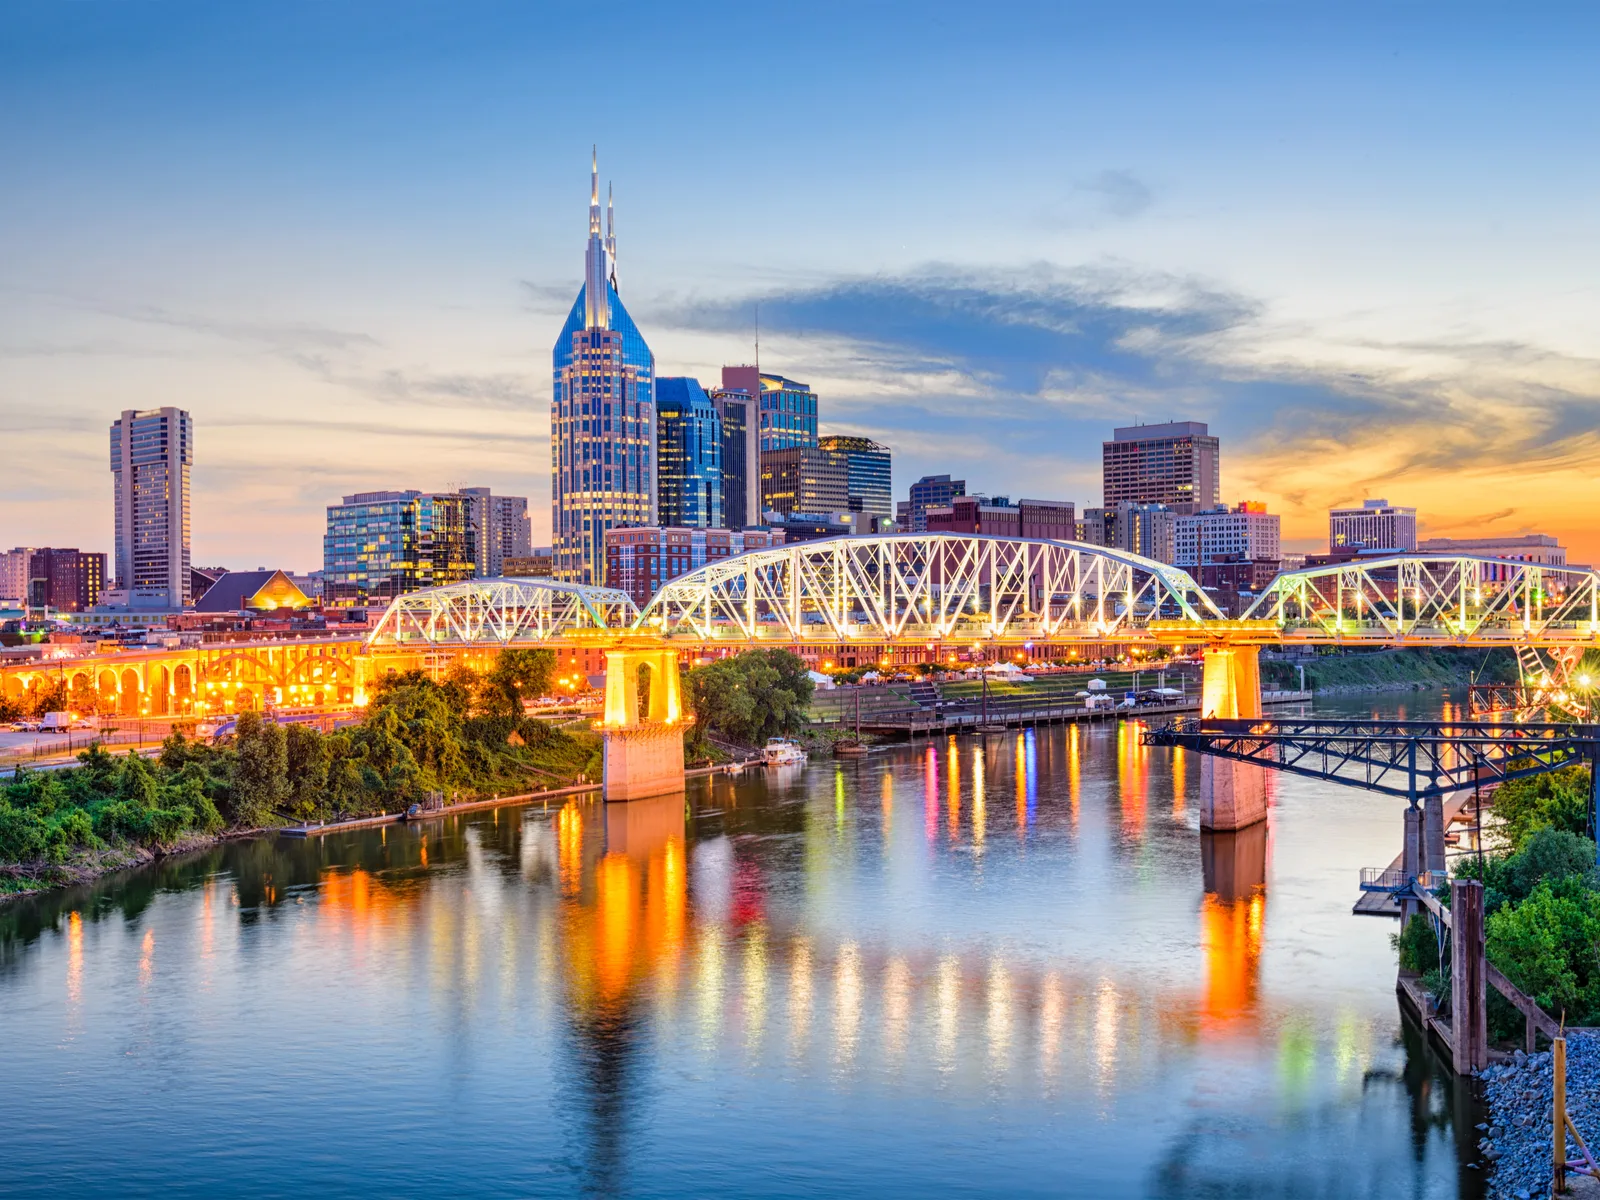 Image of Nashville, Tennessee at dusk with an aerial shot of the skyline over the river